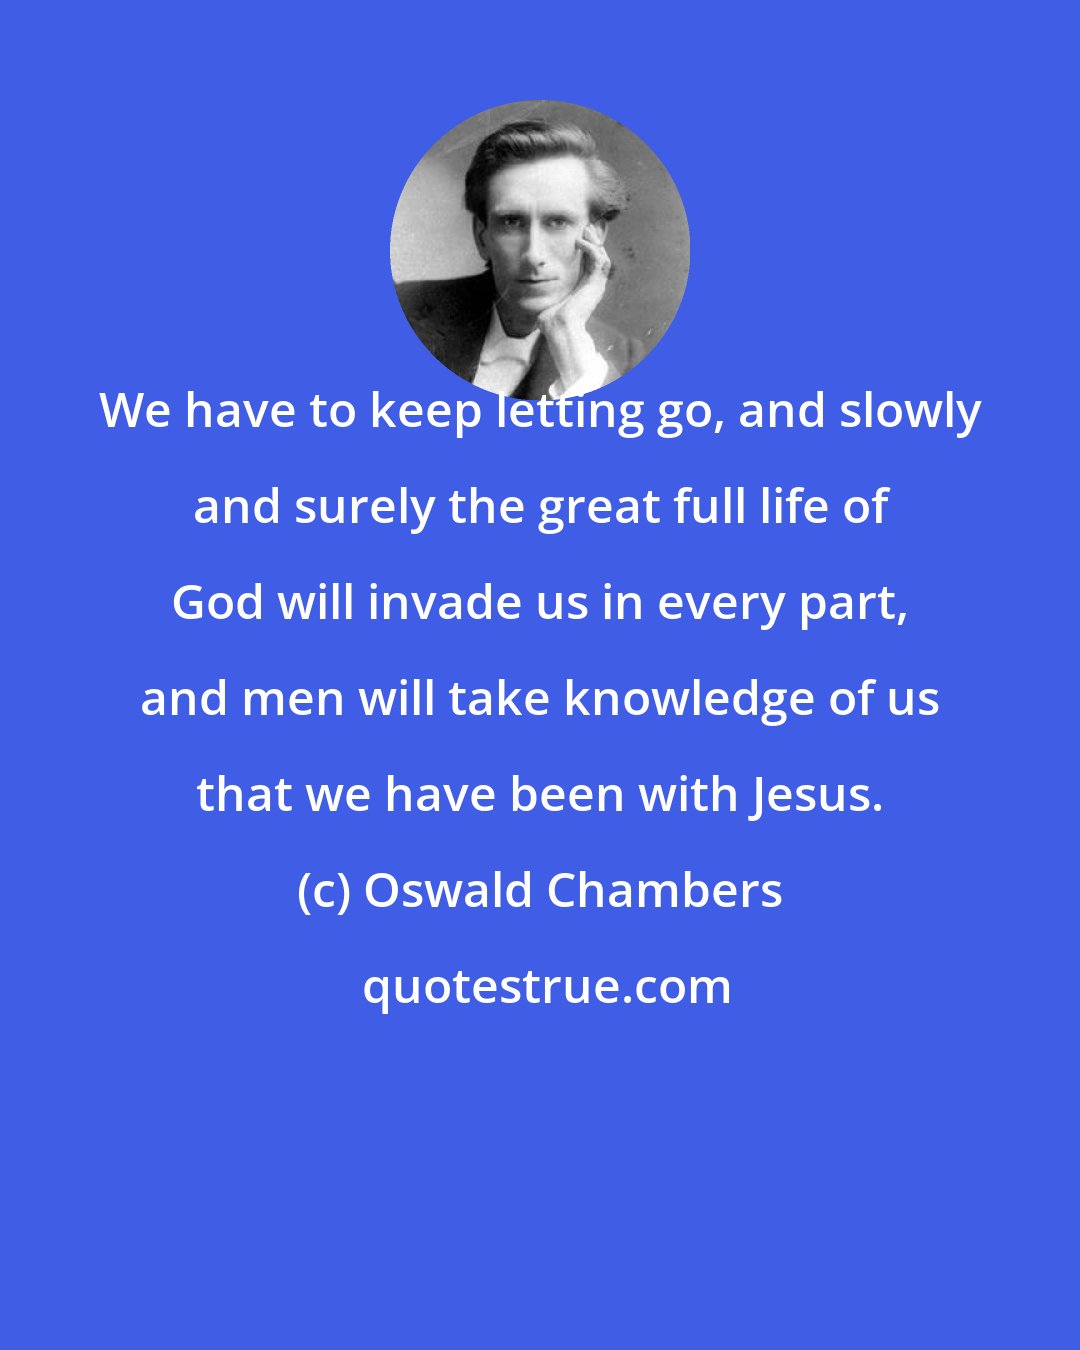 Oswald Chambers: We have to keep letting go, and slowly and surely the great full life of God will invade us in every part, and men will take knowledge of us that we have been with Jesus.